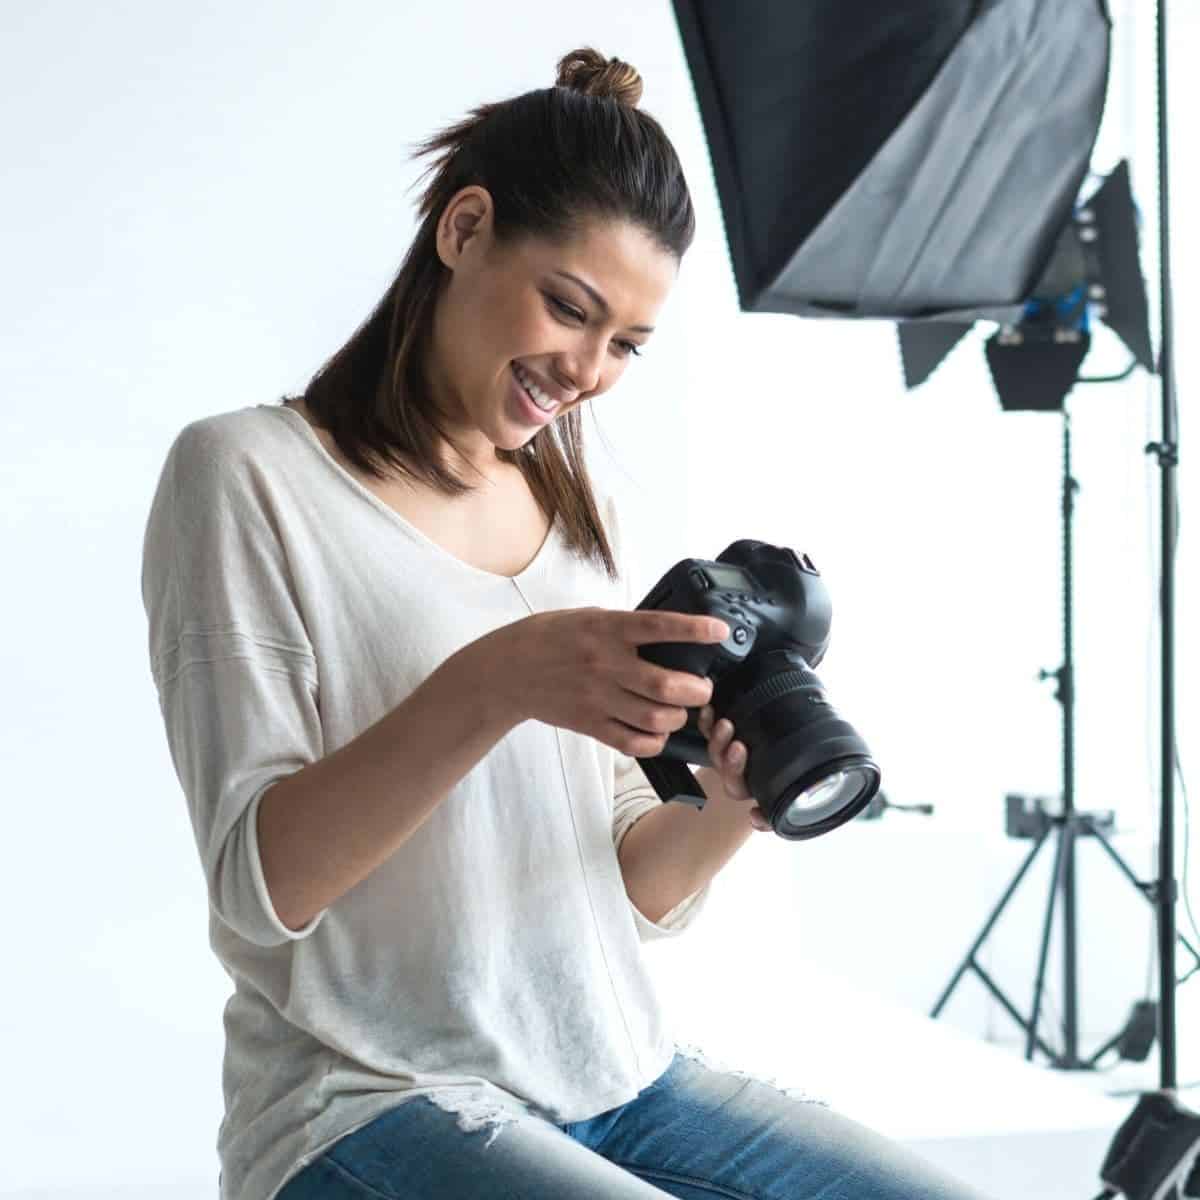 Photographer sitting down and looking at her camera in a studio.